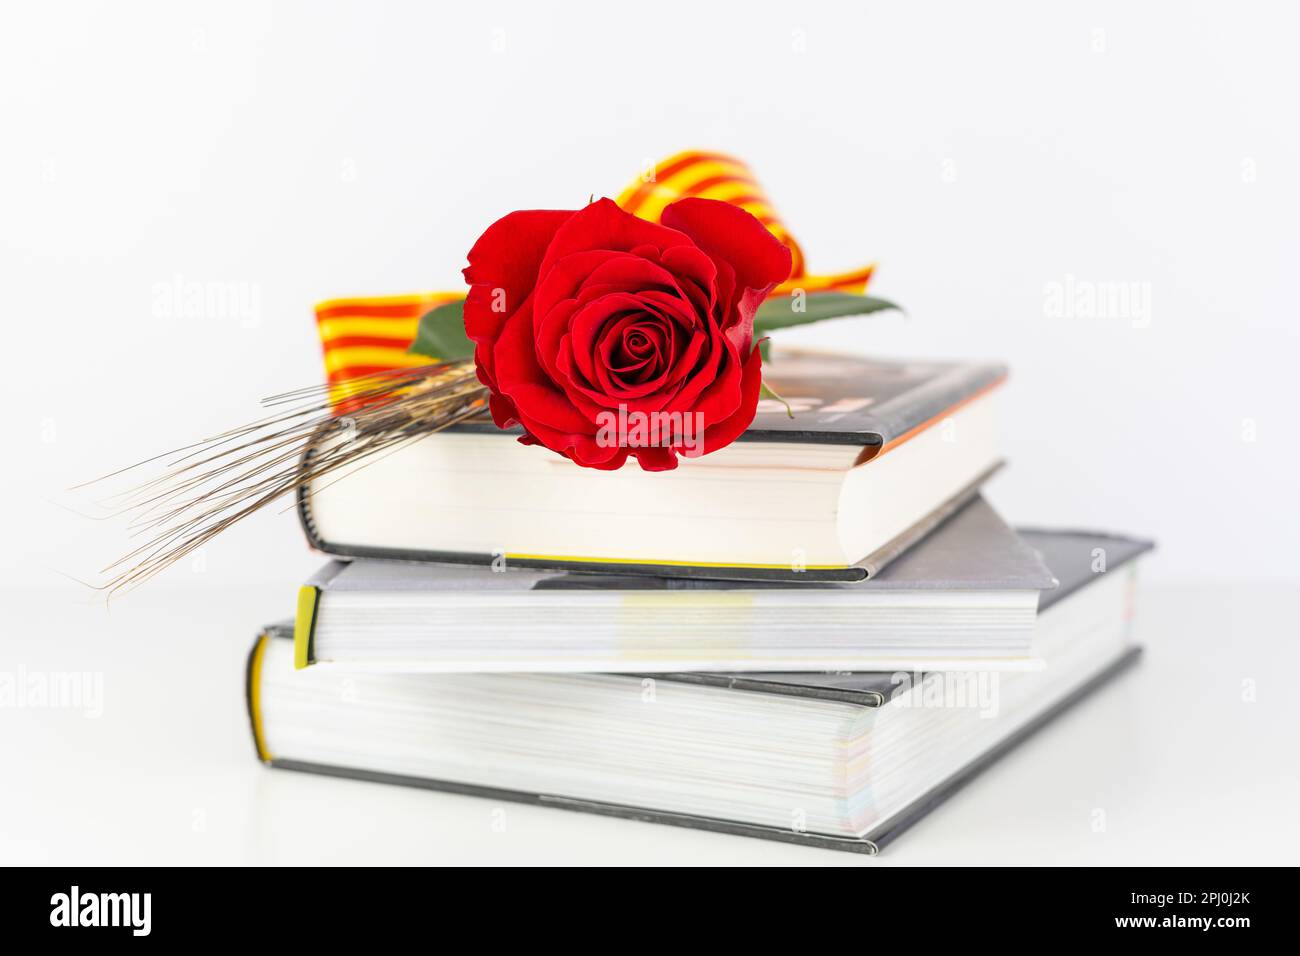 Close up red rose and ear of wheat on stack of books for Diada de Sant Jordi. Tradition of St Jordi Day in Catalonia. Catalan book and rose flower day Stock Photo